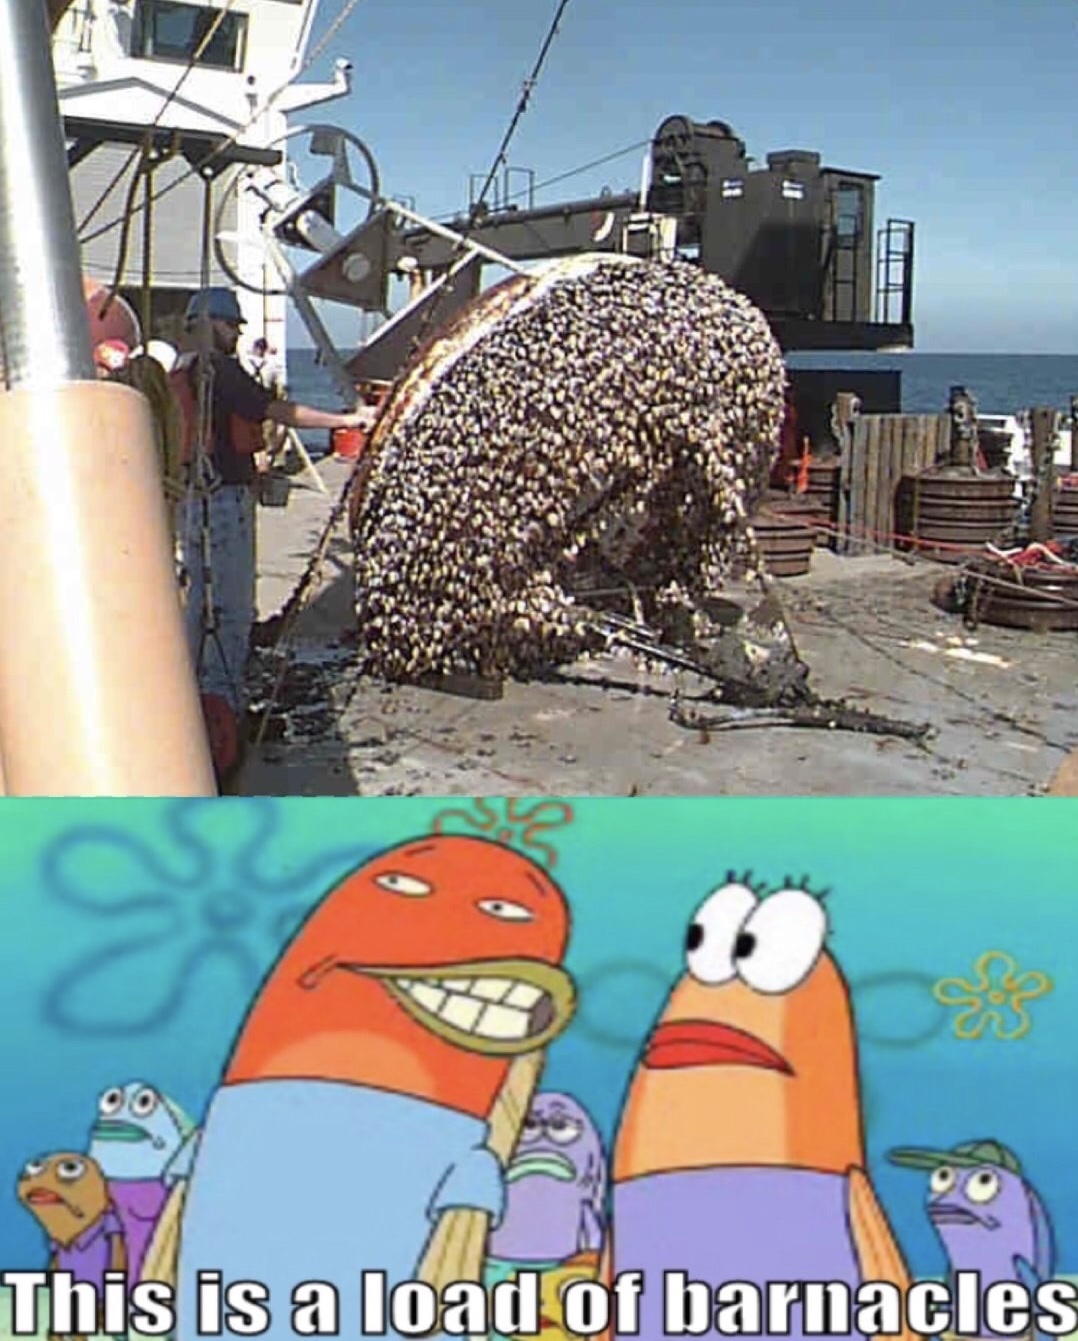 This is a load of barnacles